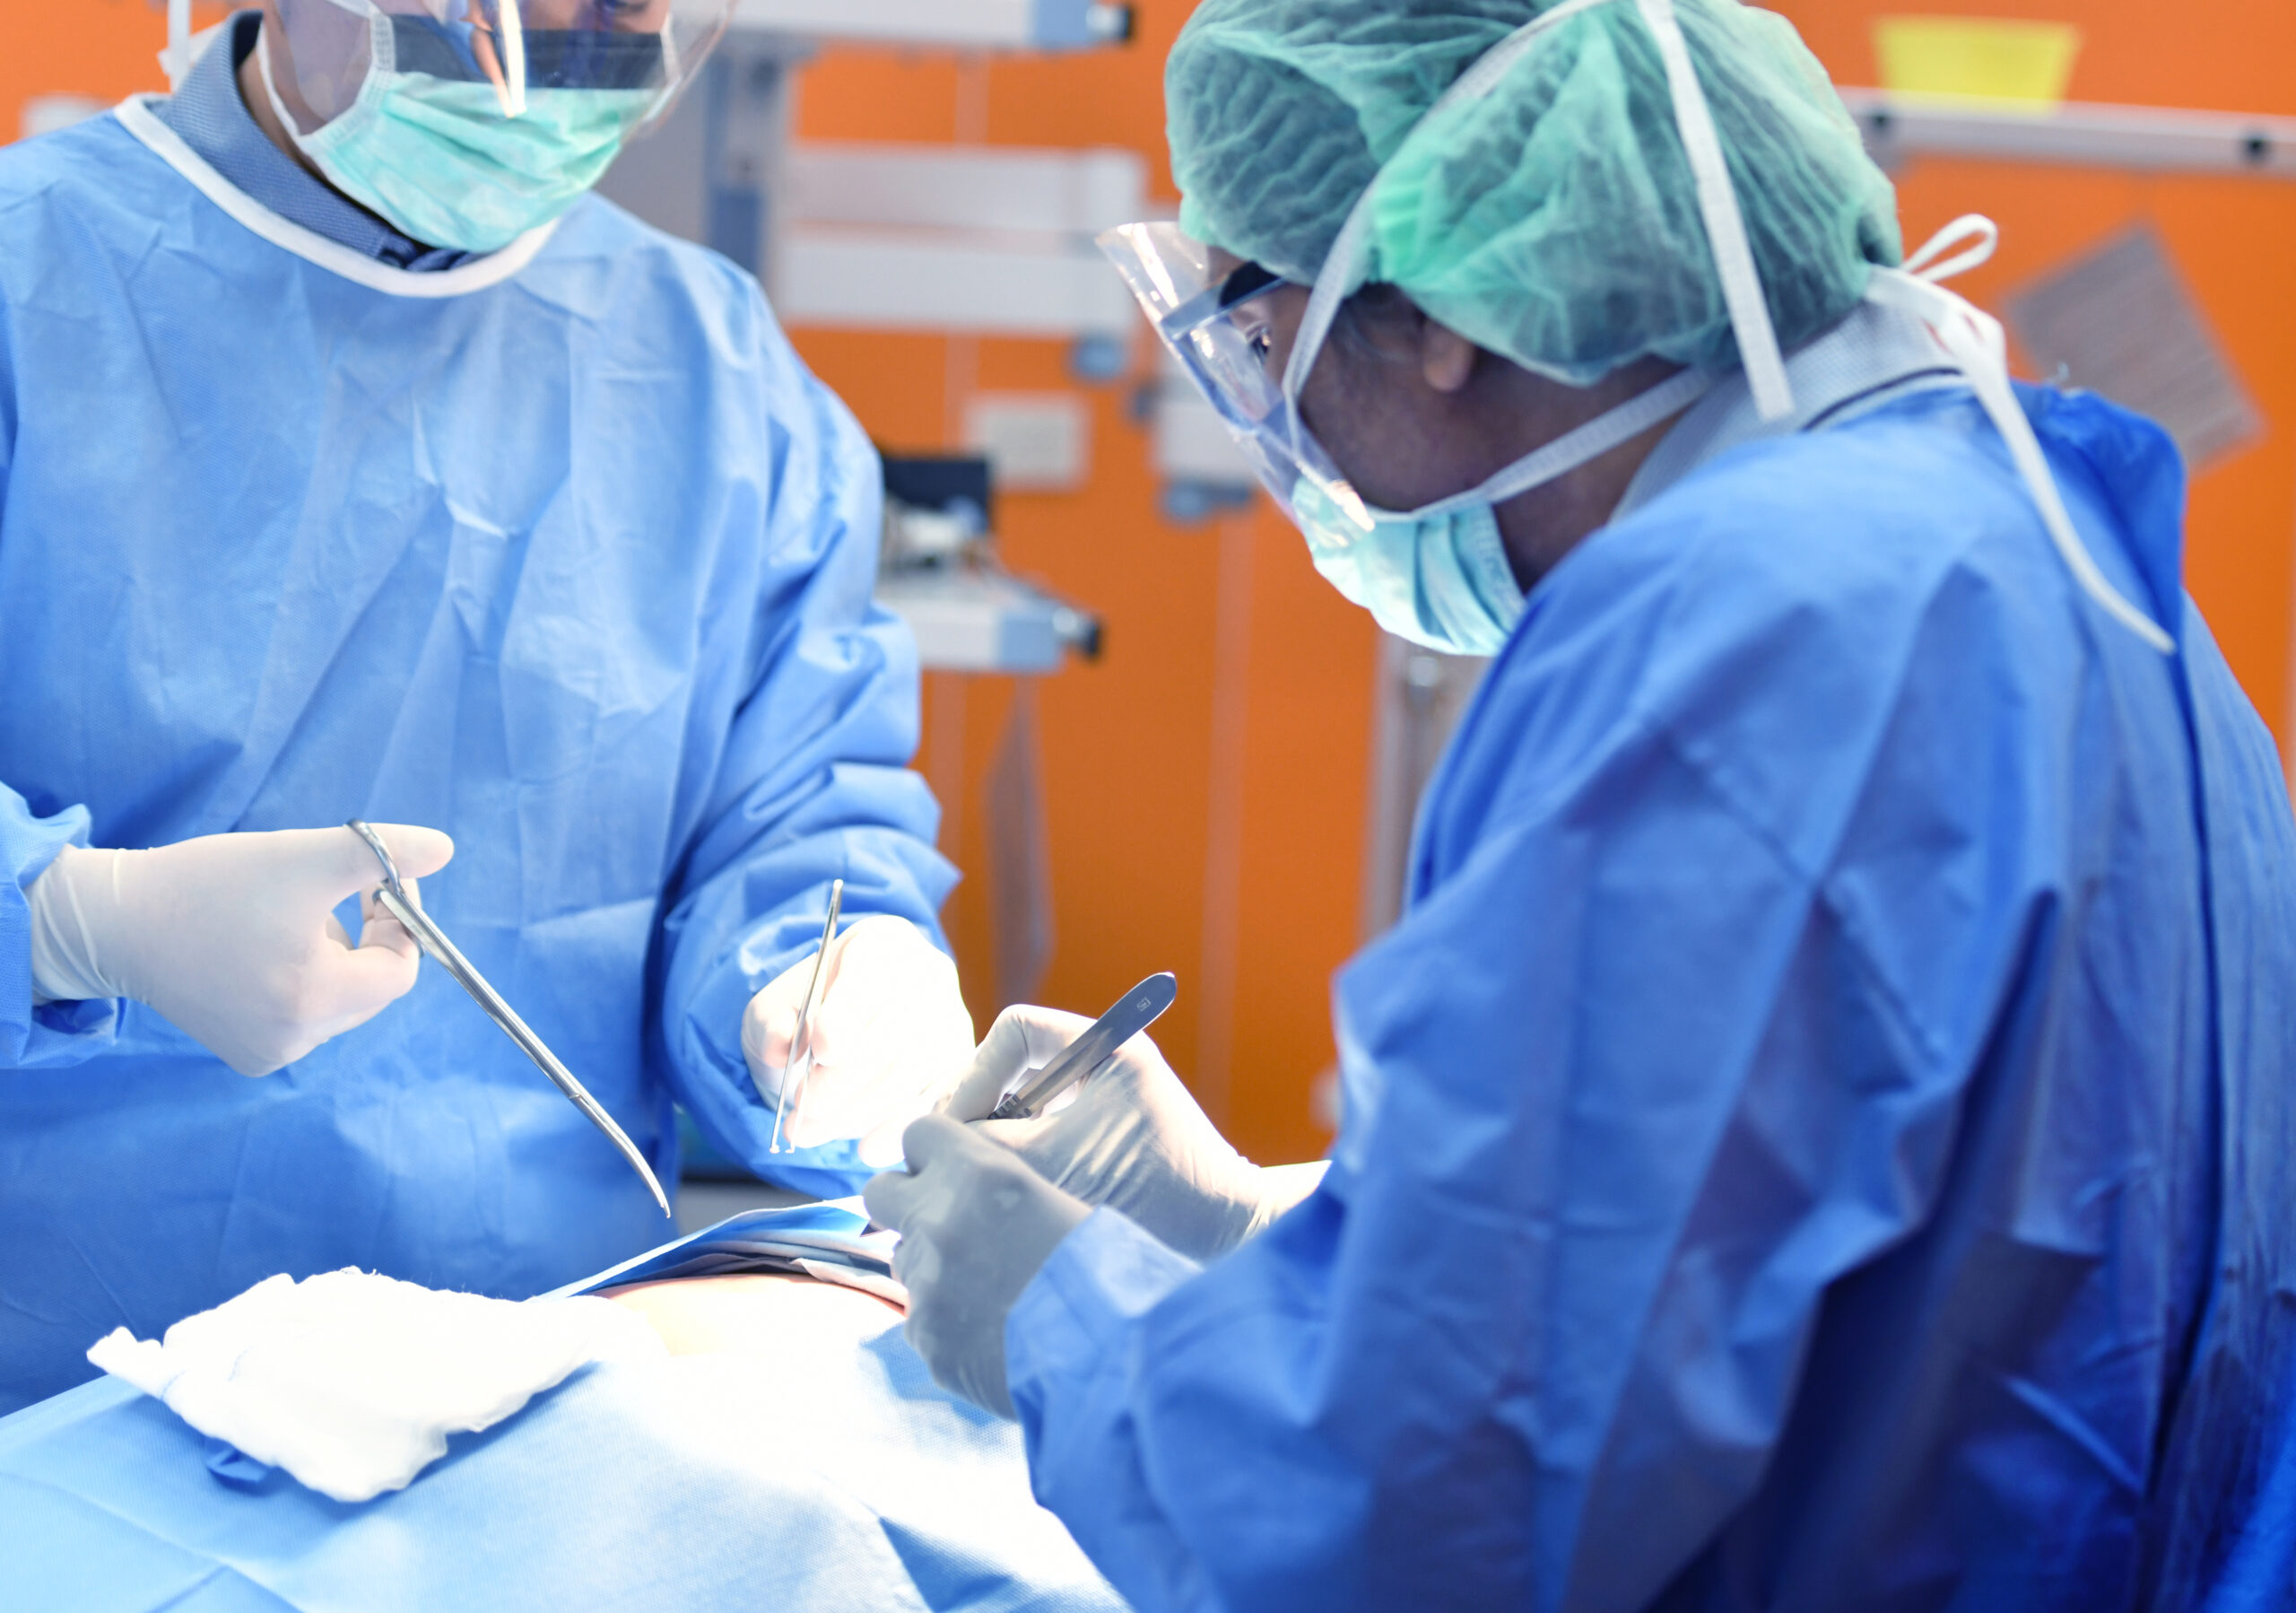 A team of surgeons during an operation working in a hospital ward.